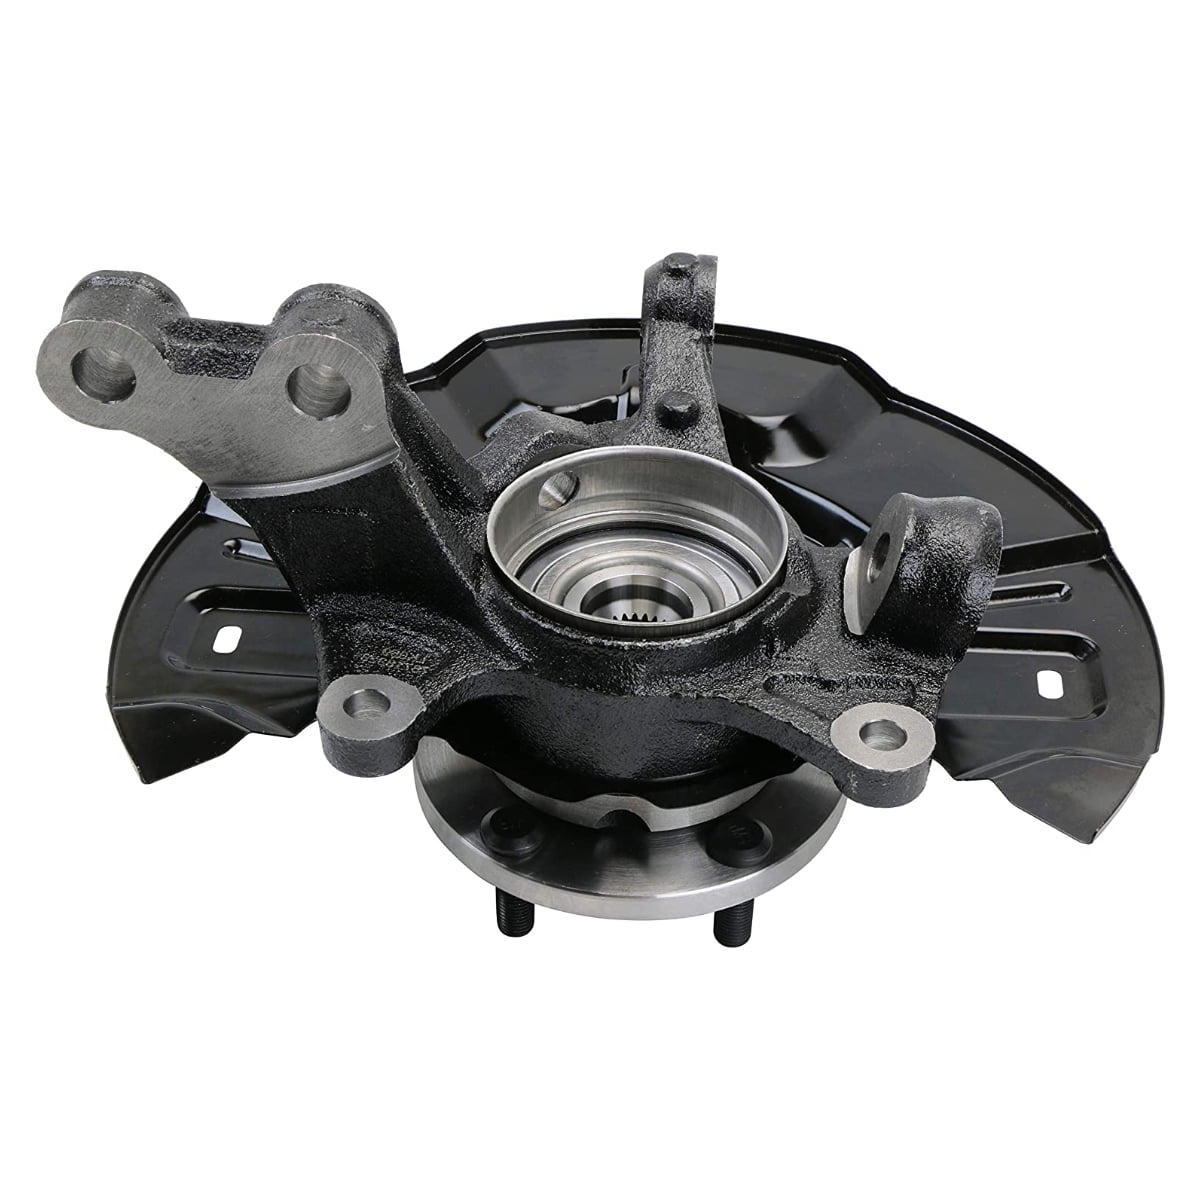 AutoShack Front Steering Knuckle and Wheel Bearing Hub Assembly 5 Lugs  Passenger Side Replacement for 2009 2010 2011 2012 2013 Toyota Matrix 2.4L  FWD